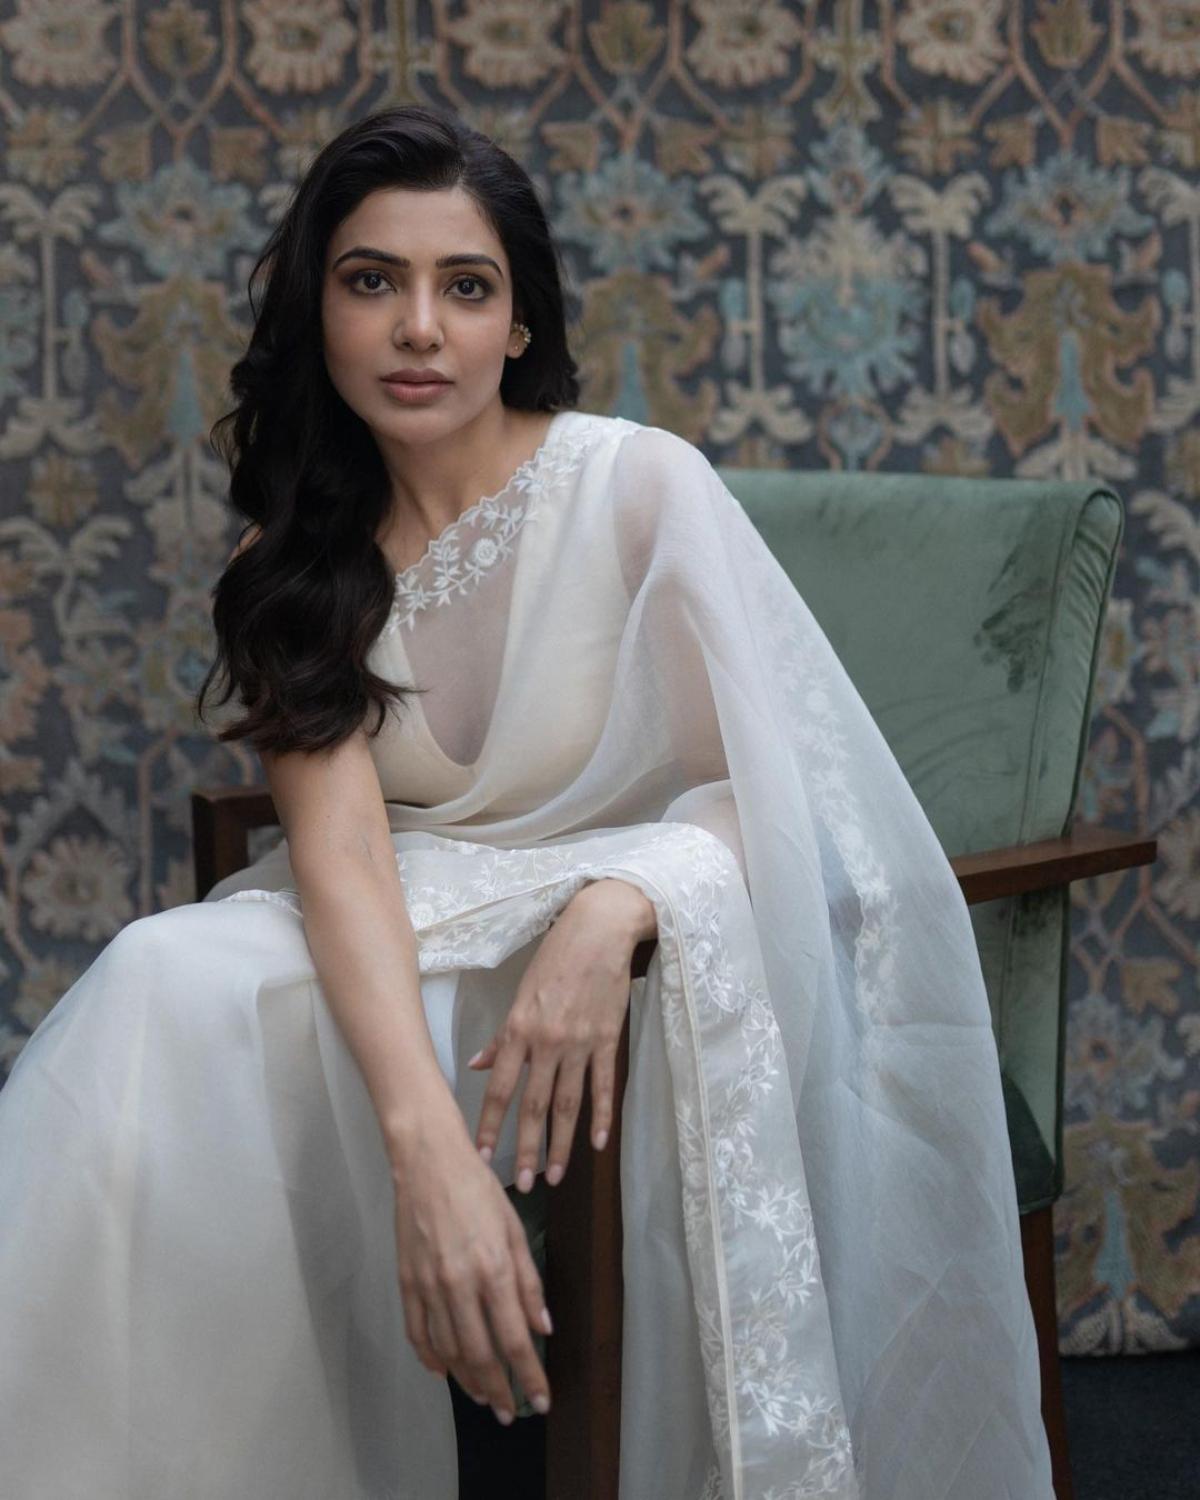 Sex Videos Tamil Sneha - Fashion Friday: 5 times Samantha Ruth Prabhu stunned in white outfits  during 'Shaakuntalam' promotions